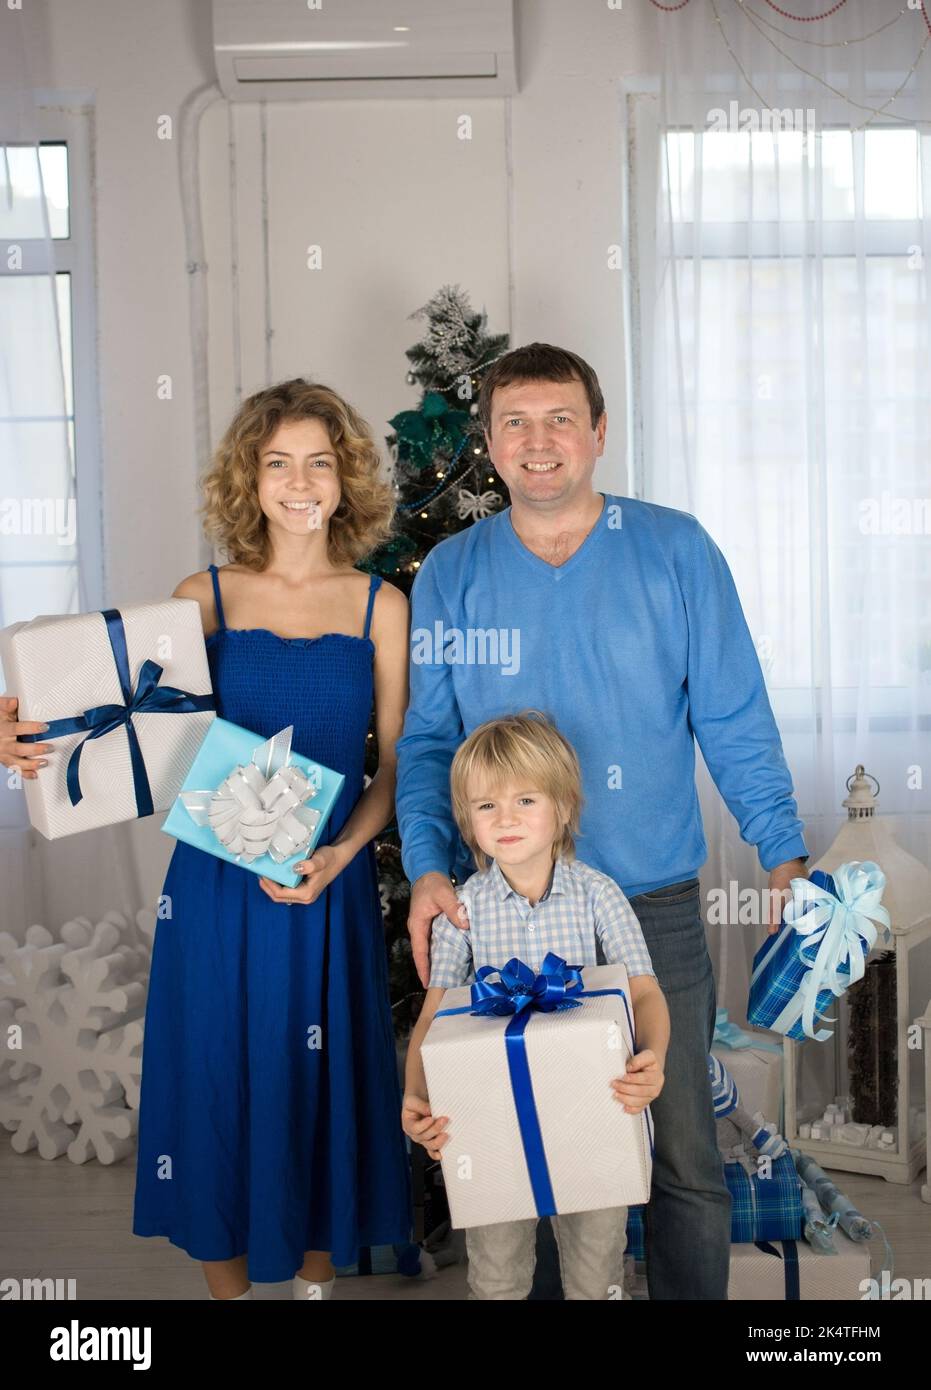 happy family, dad, adult daughter, son 5 years old with gift boxes in hands on Christmas Eve. Bright positive emotions on faces, smile. Blue - white c Stock Photo